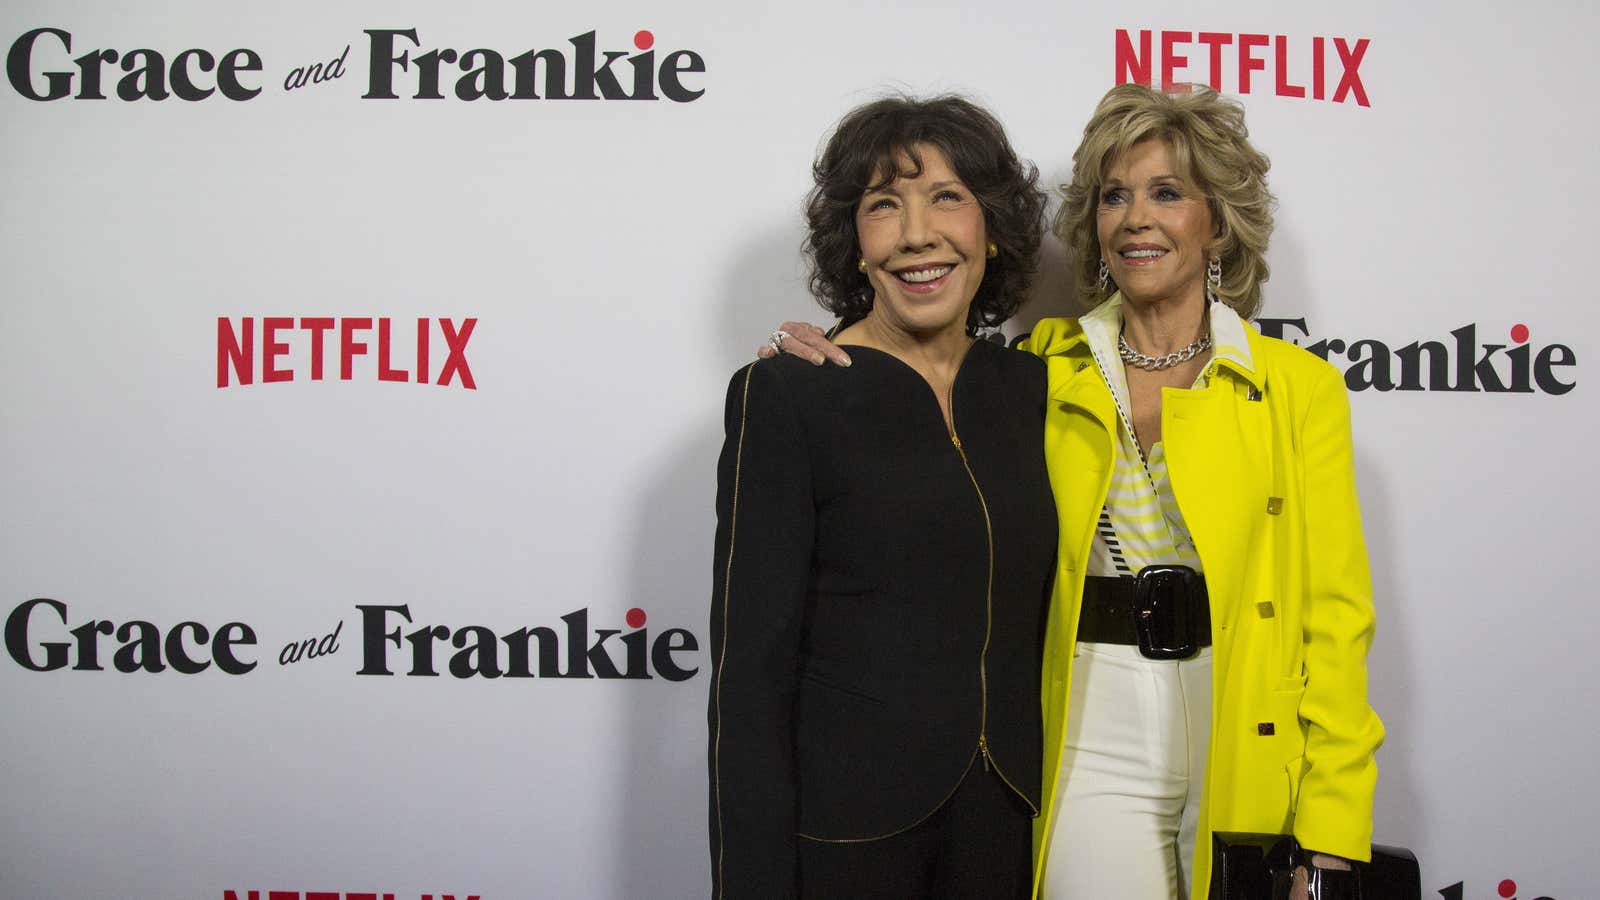 Longtime friends Lily Tomlin and Jane Fonda are way too old for this crap.